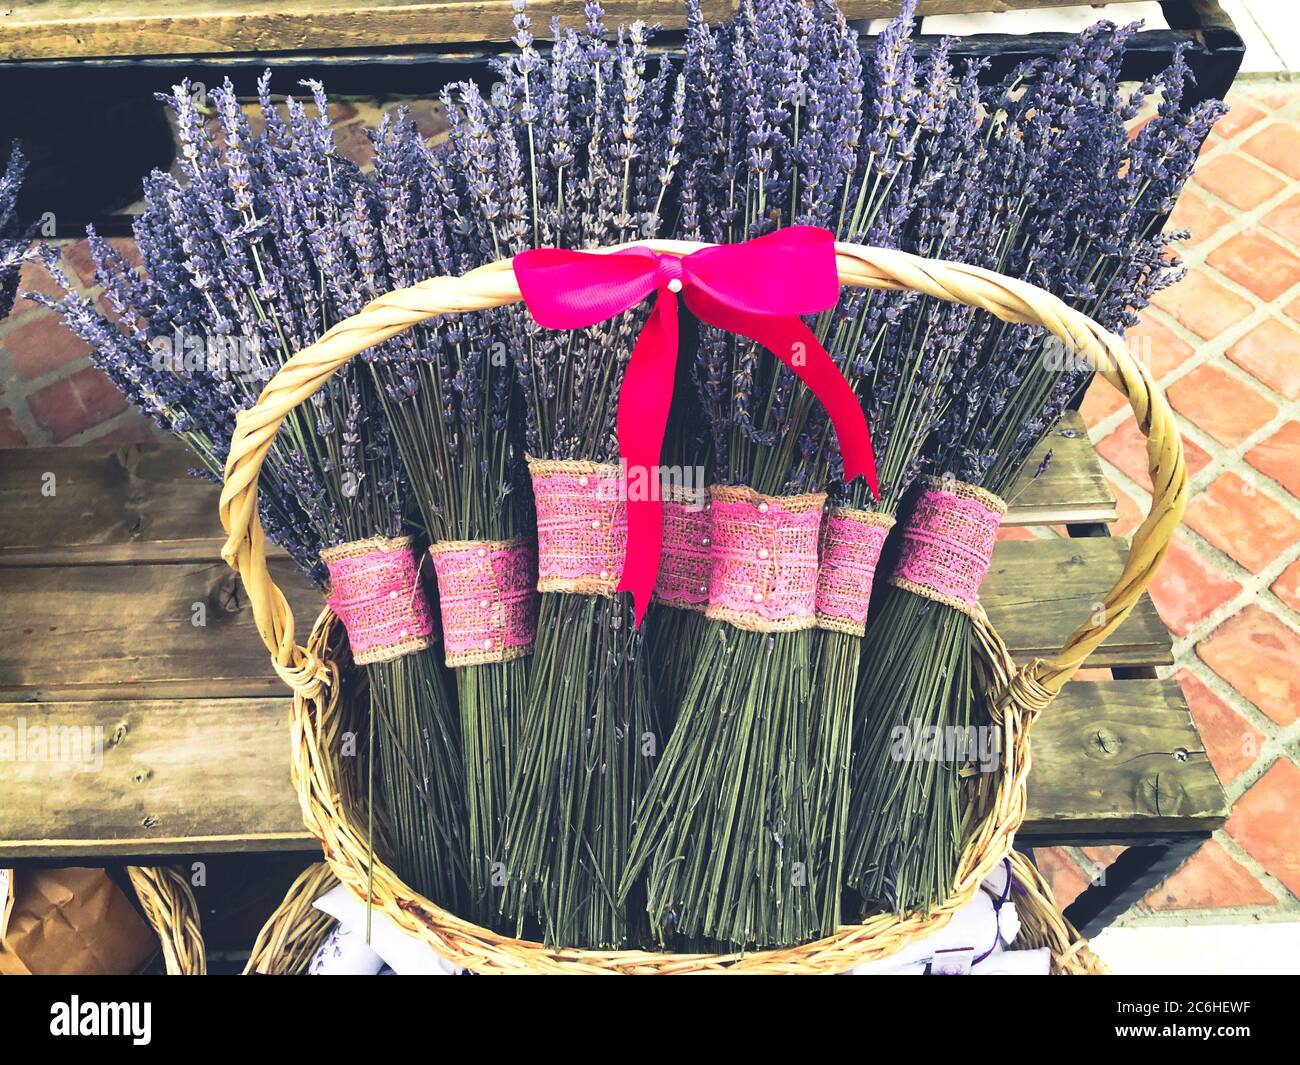 Dry lavender flowers bunch with red ribbon in a street market . Stock Photo